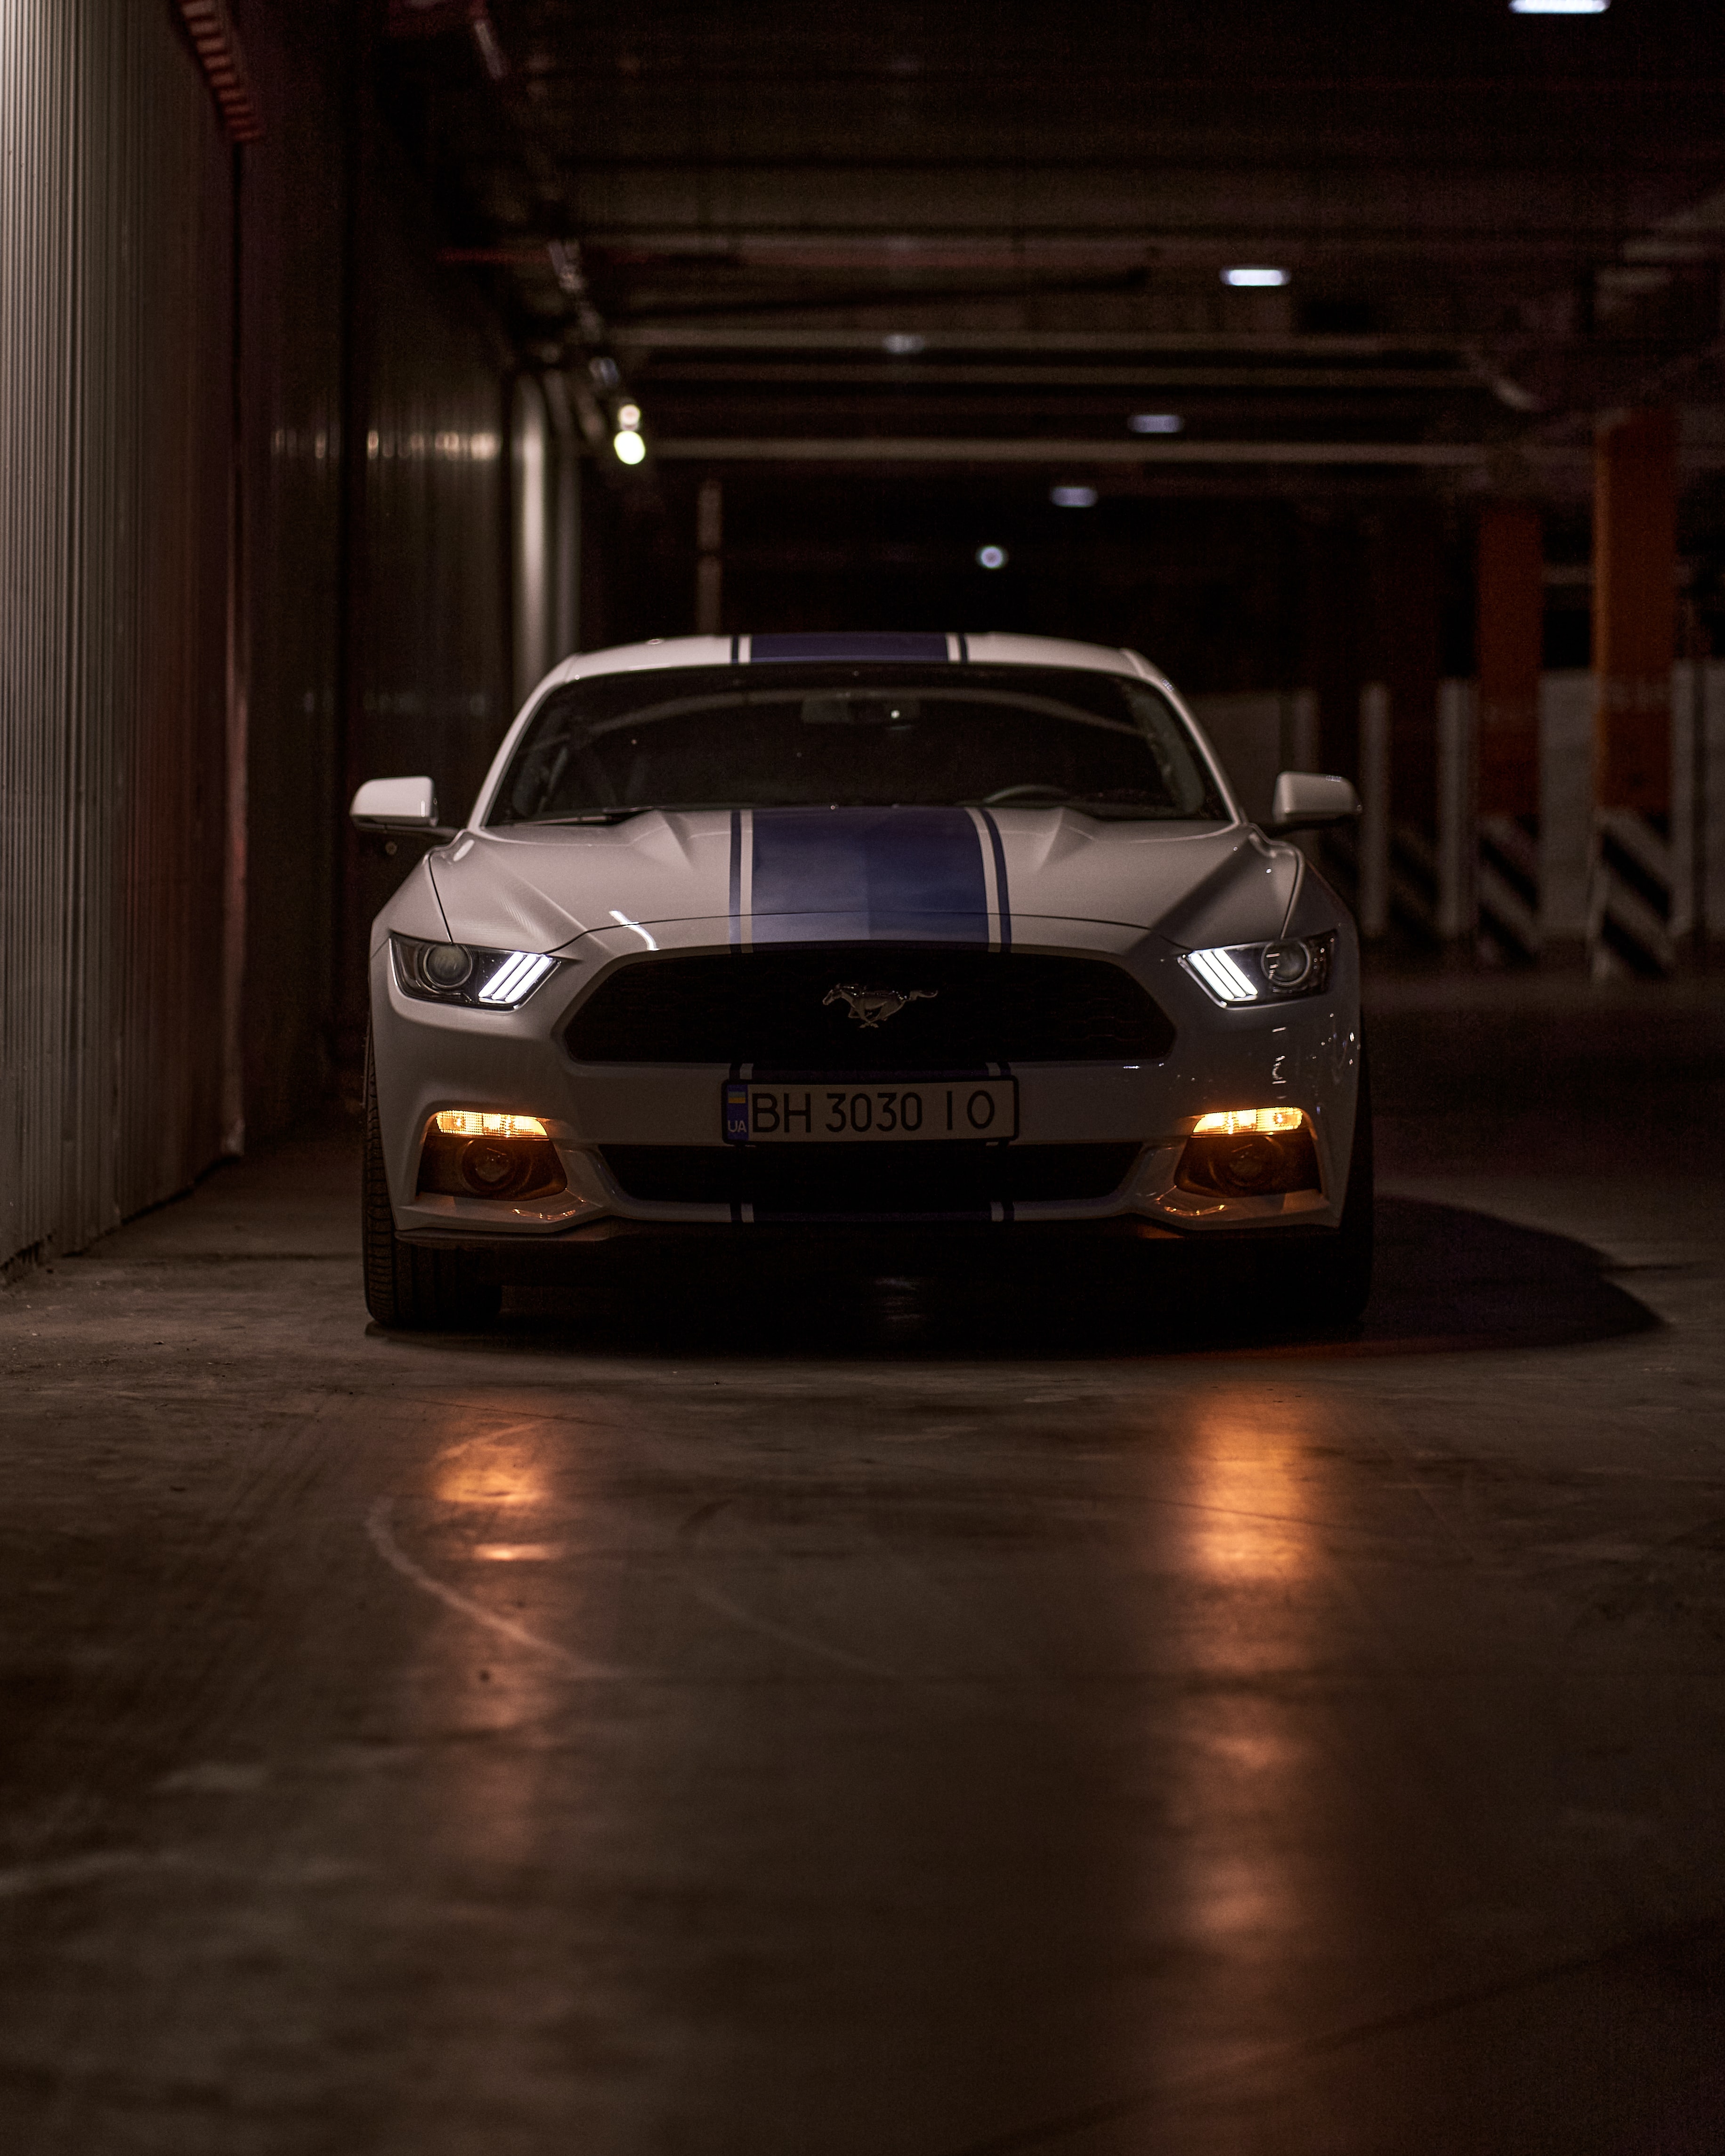 mustang, cars, car, front view, sports car, mustang gt, lights, headlights, sports Full HD